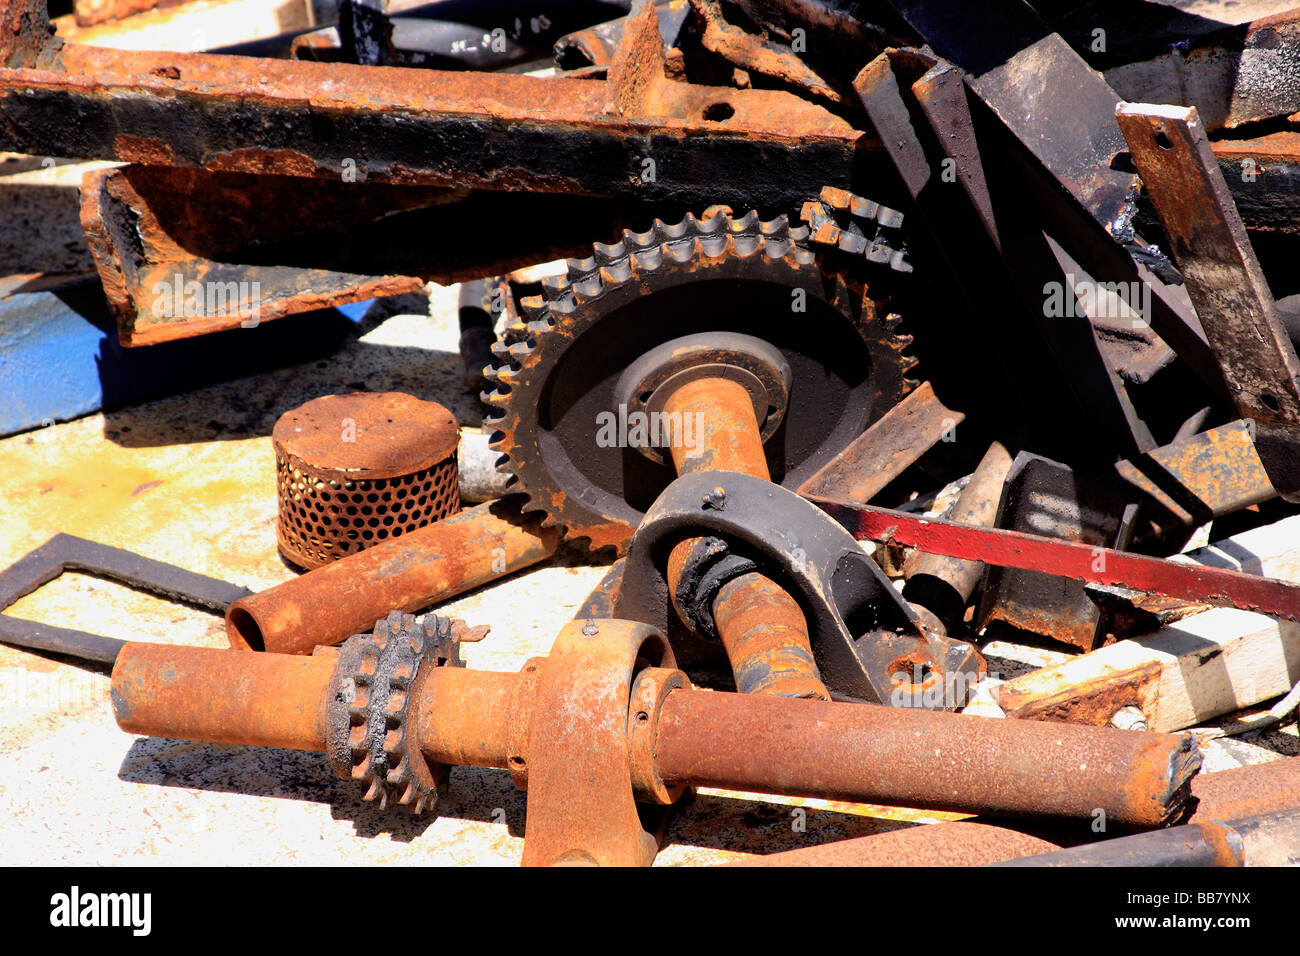 https://c8.alamy.com/comp/BB7YNX/assortment-of-old-rusted-commercial-fishing-boat-parts-greenport-long-BB7YNX.jpg